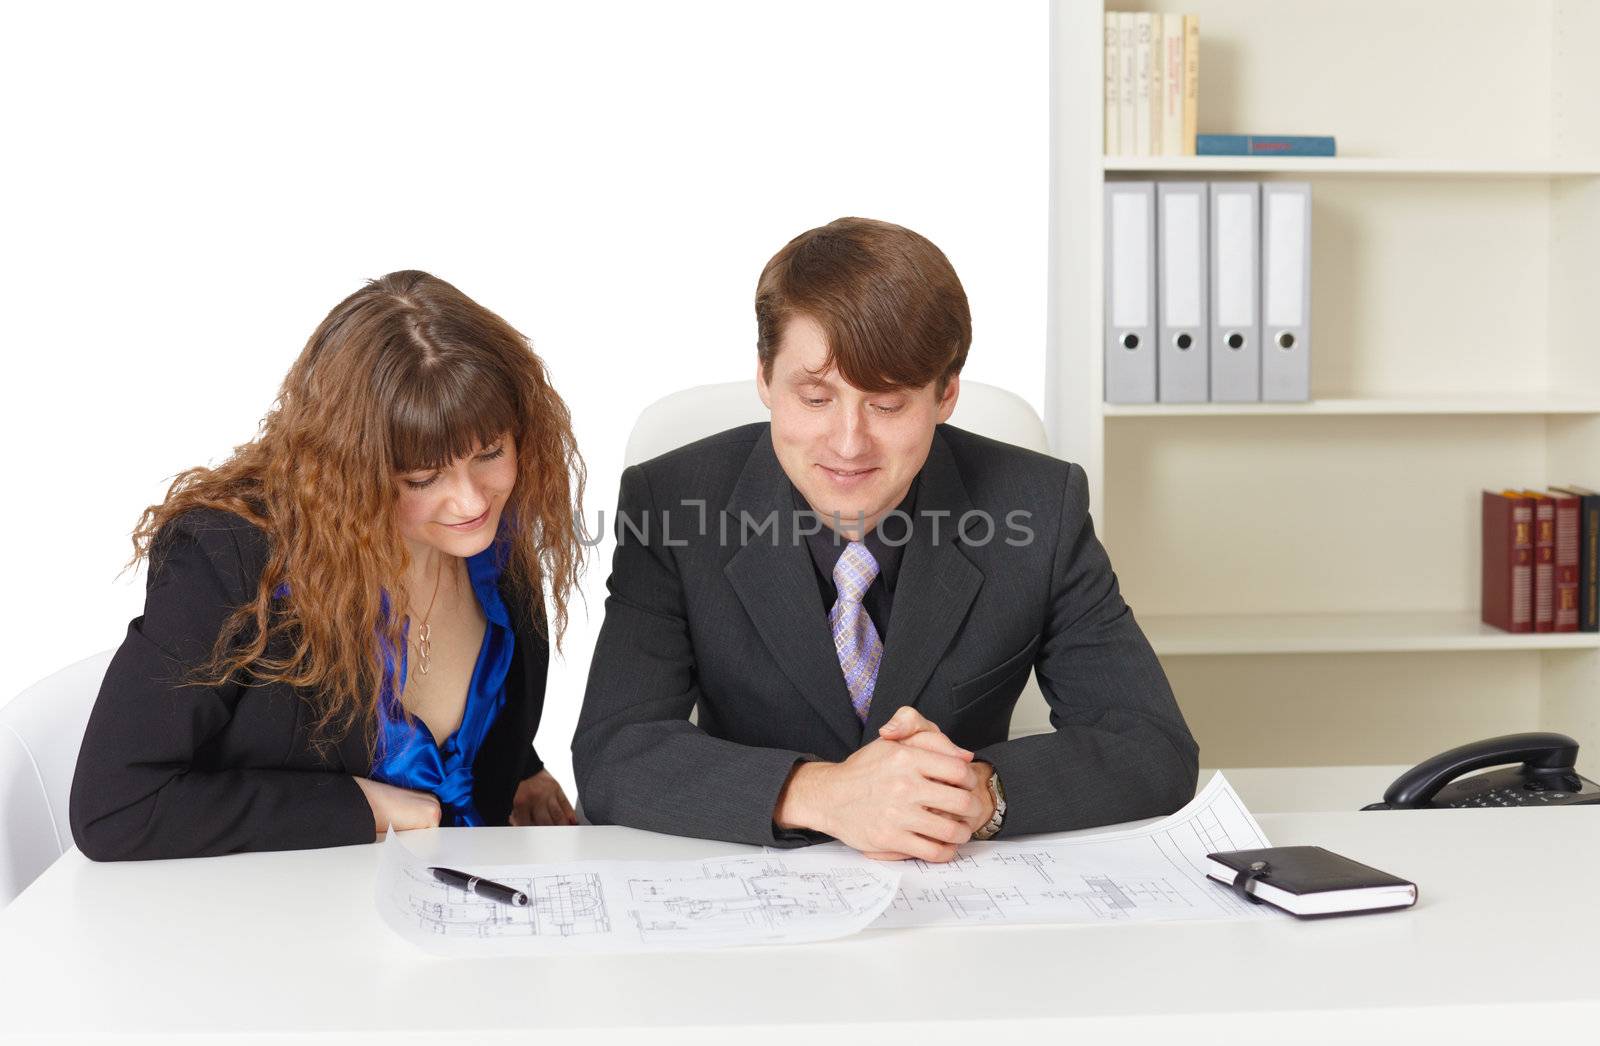 A man and a woman - engineers, working in the office